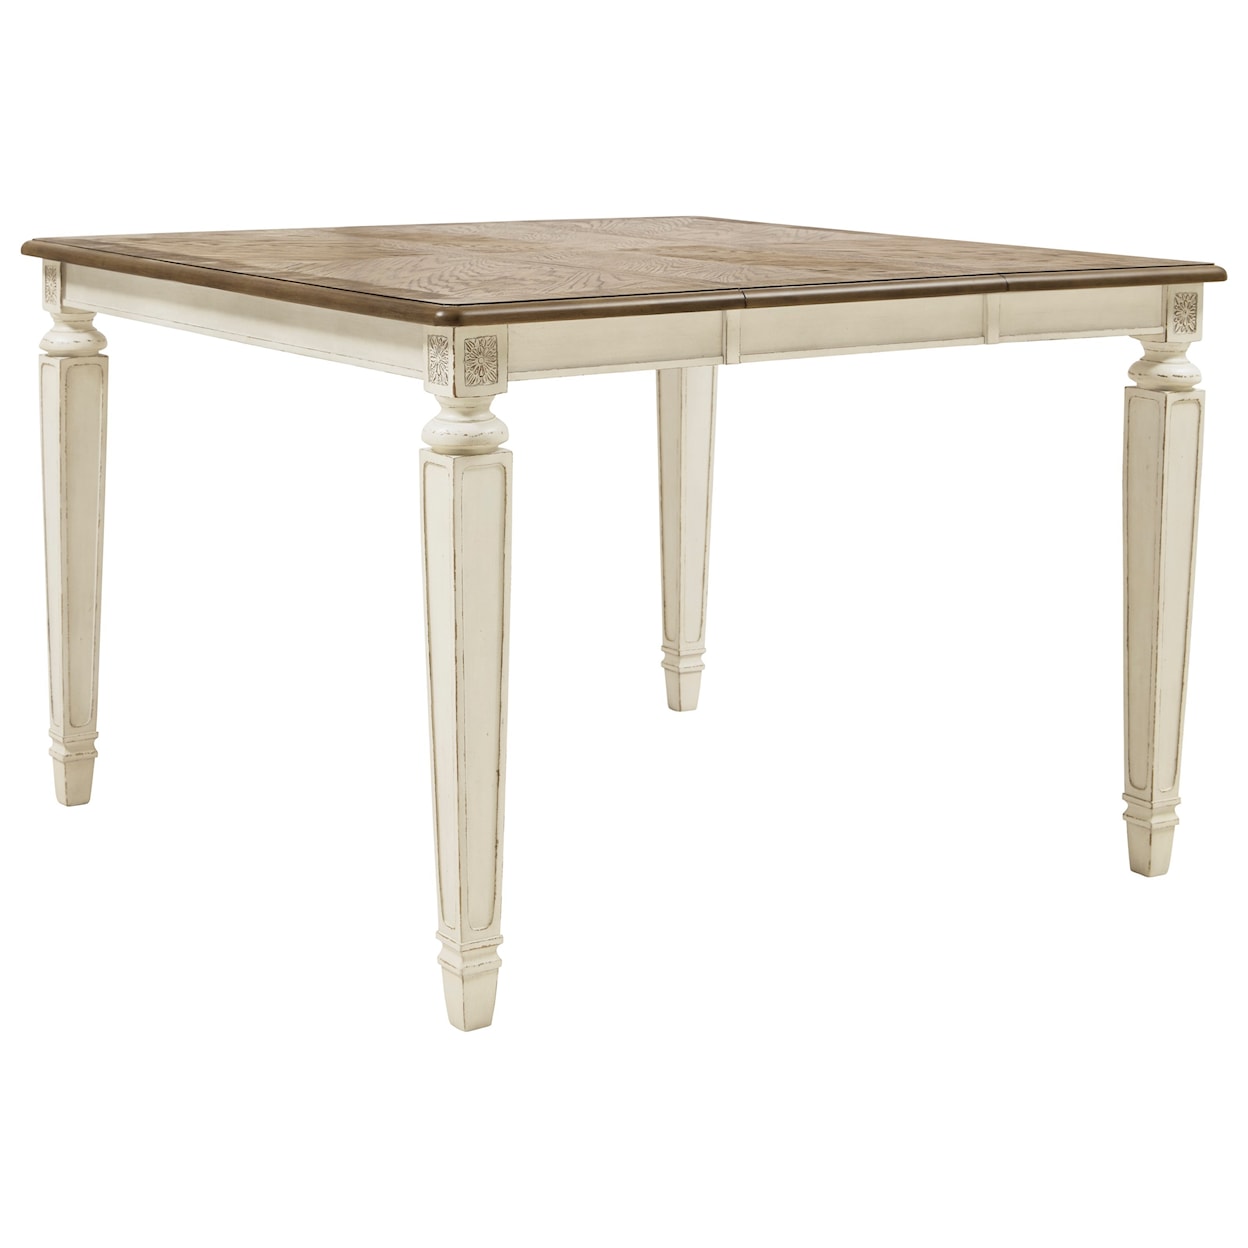 Signature Design by Ashley Realyn Square Counter Extension Table